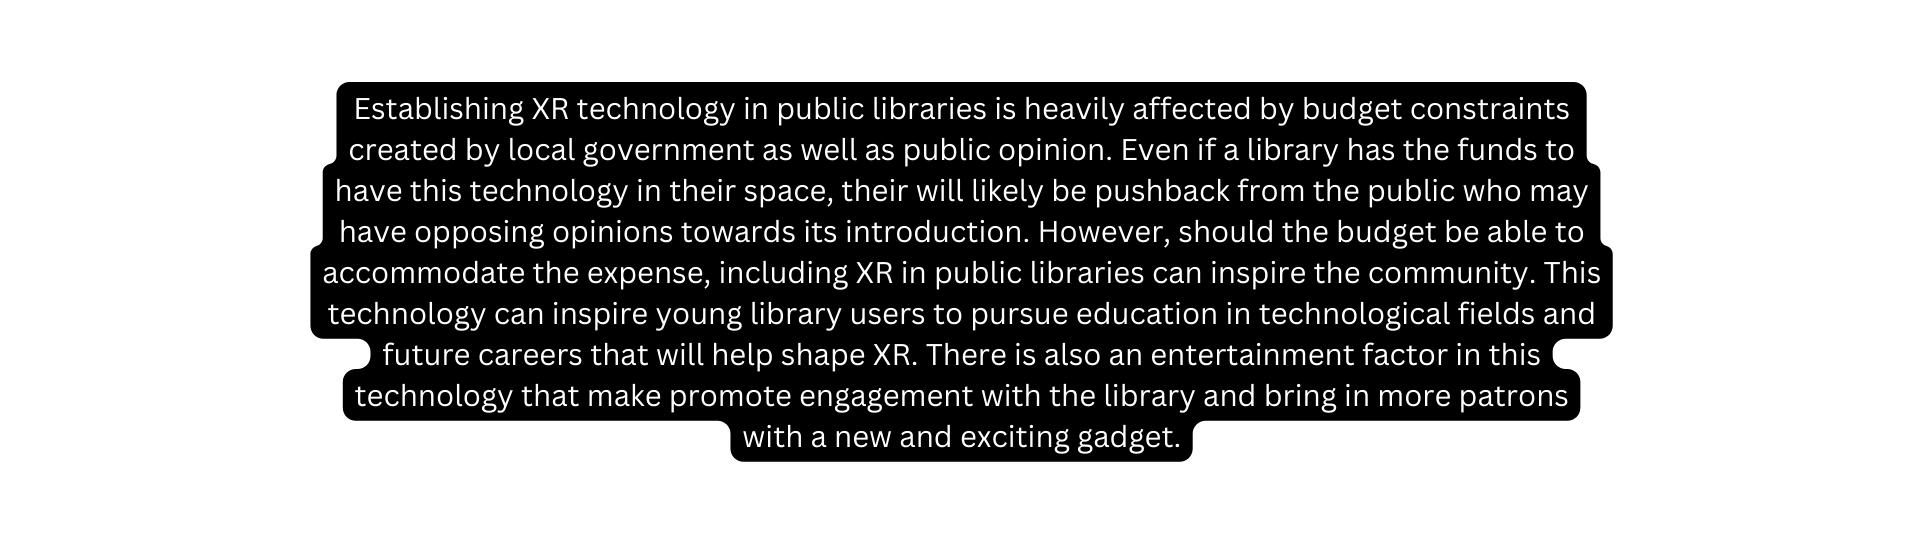 Establishing XR technology in public libraries is heavily affected by budget constraints created by local government as well as public opinion Even if a library has the funds to have this technology in their space their will likely be pushback from the public who may have opposing opinions towards its introduction However should the budget be able to accommodate the expense including XR in public libraries can inspire the community This technology can inspire young library users to pursue education in technological fields and future careers that will help shape XR There is also an entertainment factor in this technology that make promote engagement with the library and bring in more patrons with a new and exciting gadget